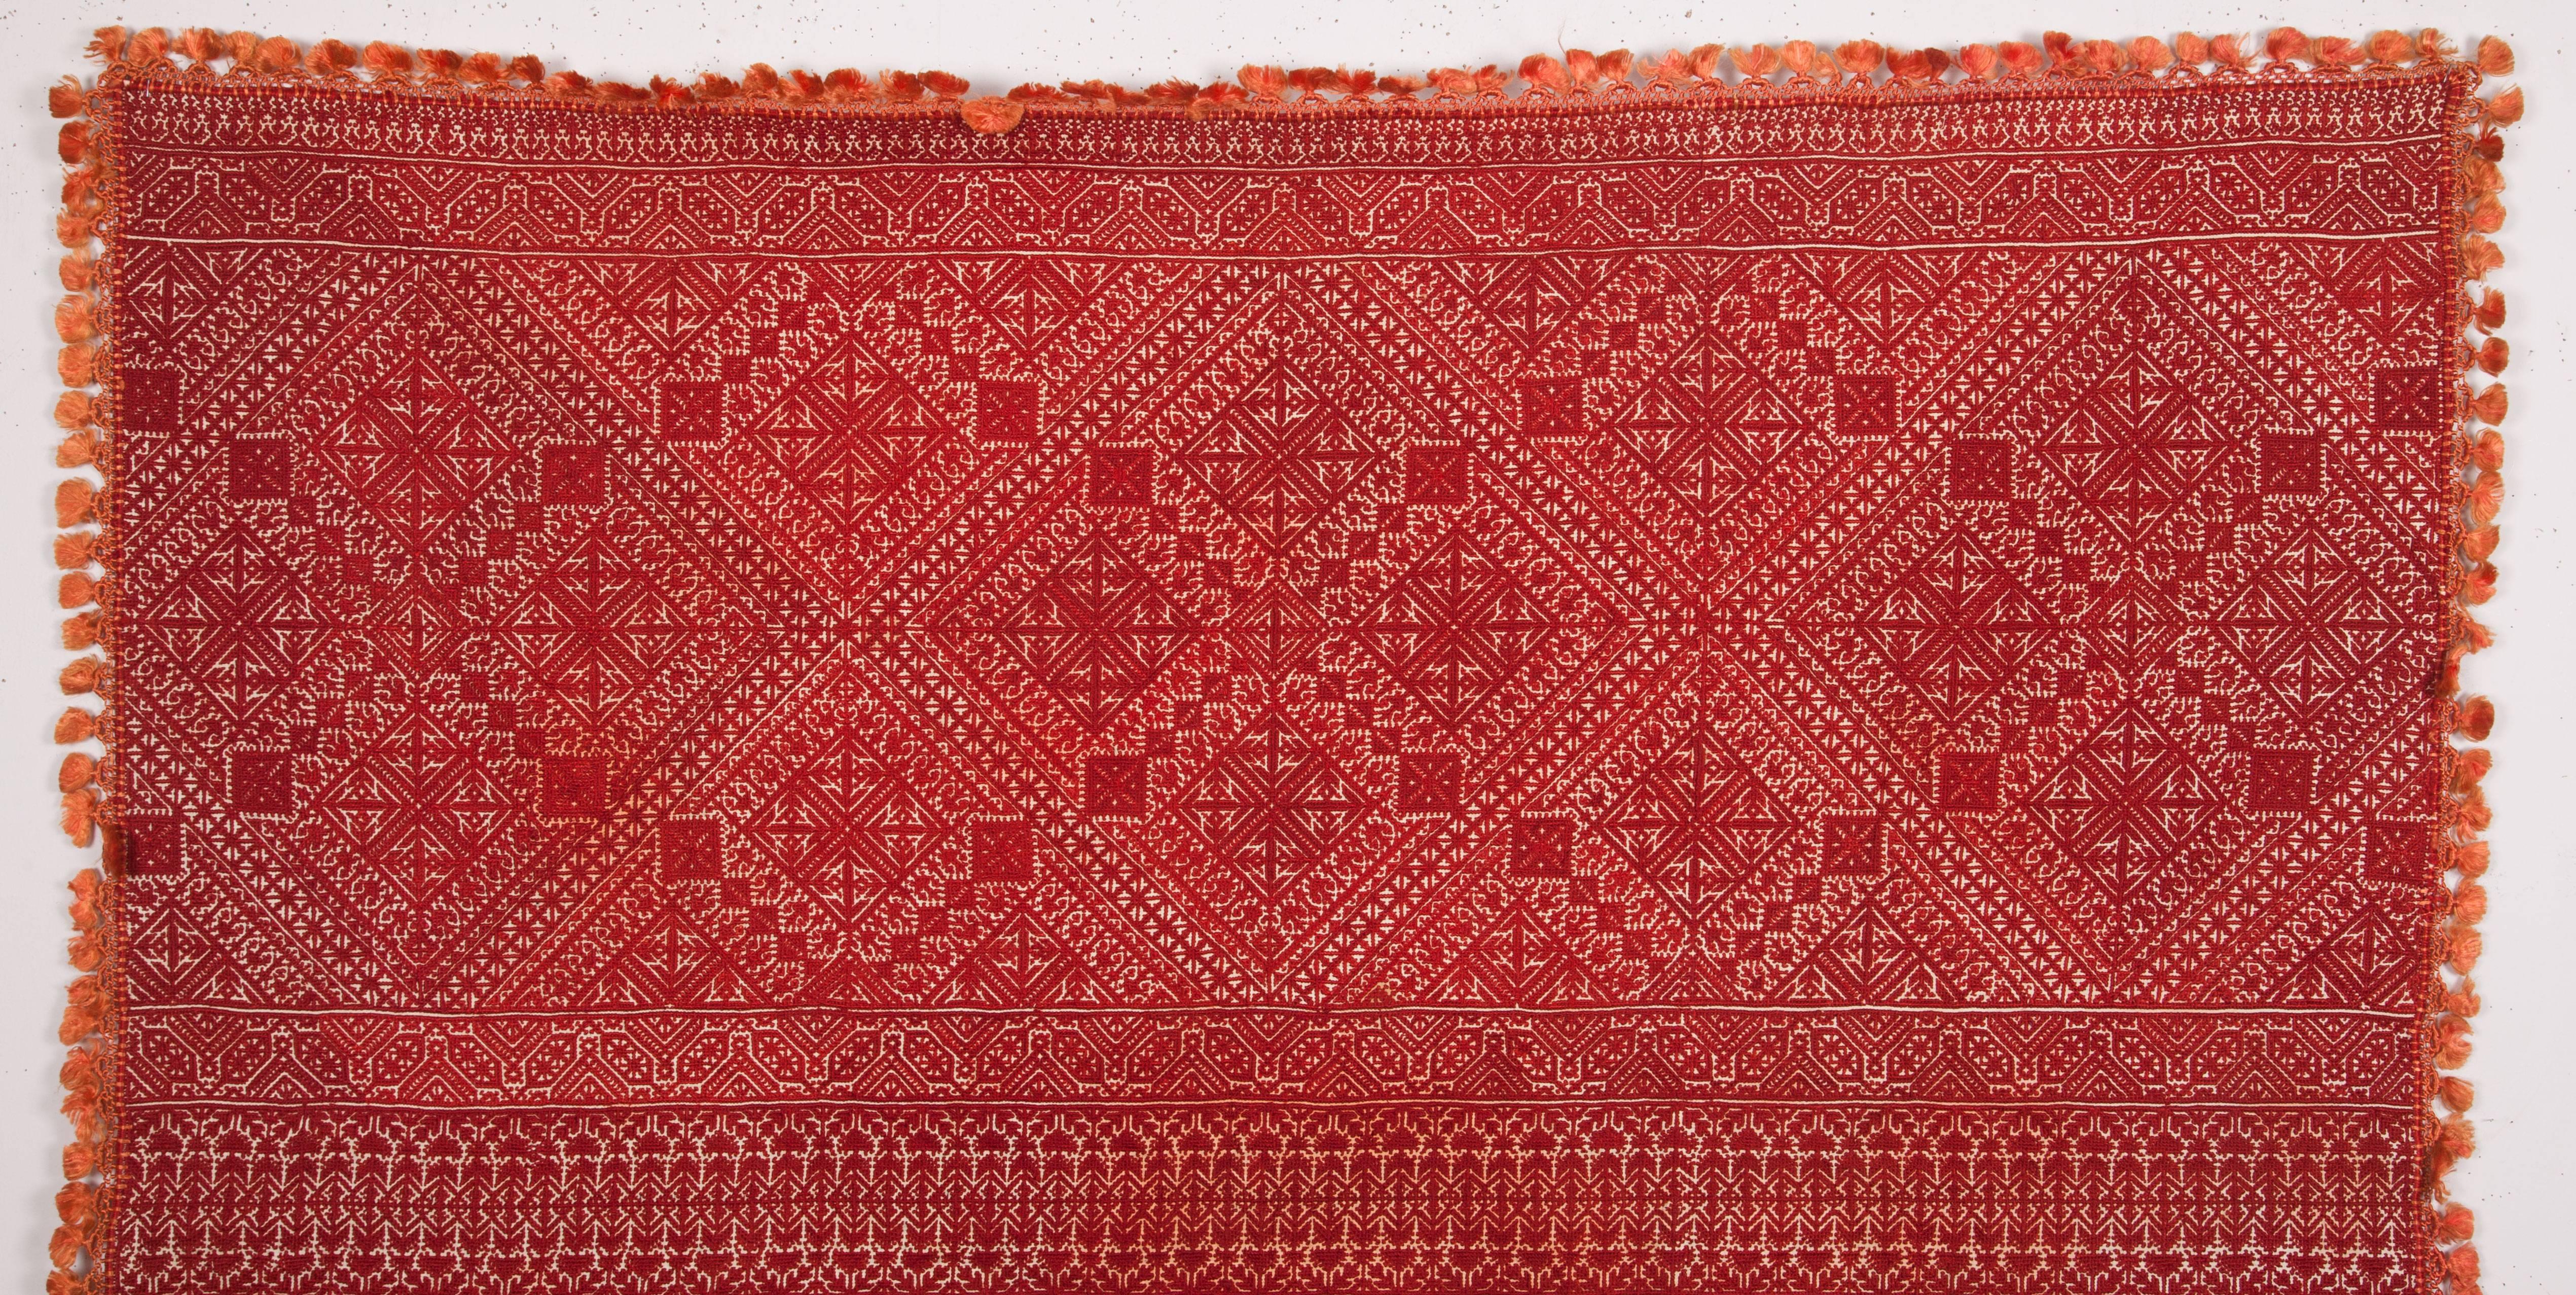 19th century antique Moroccan Fez embroidery in superb condition.